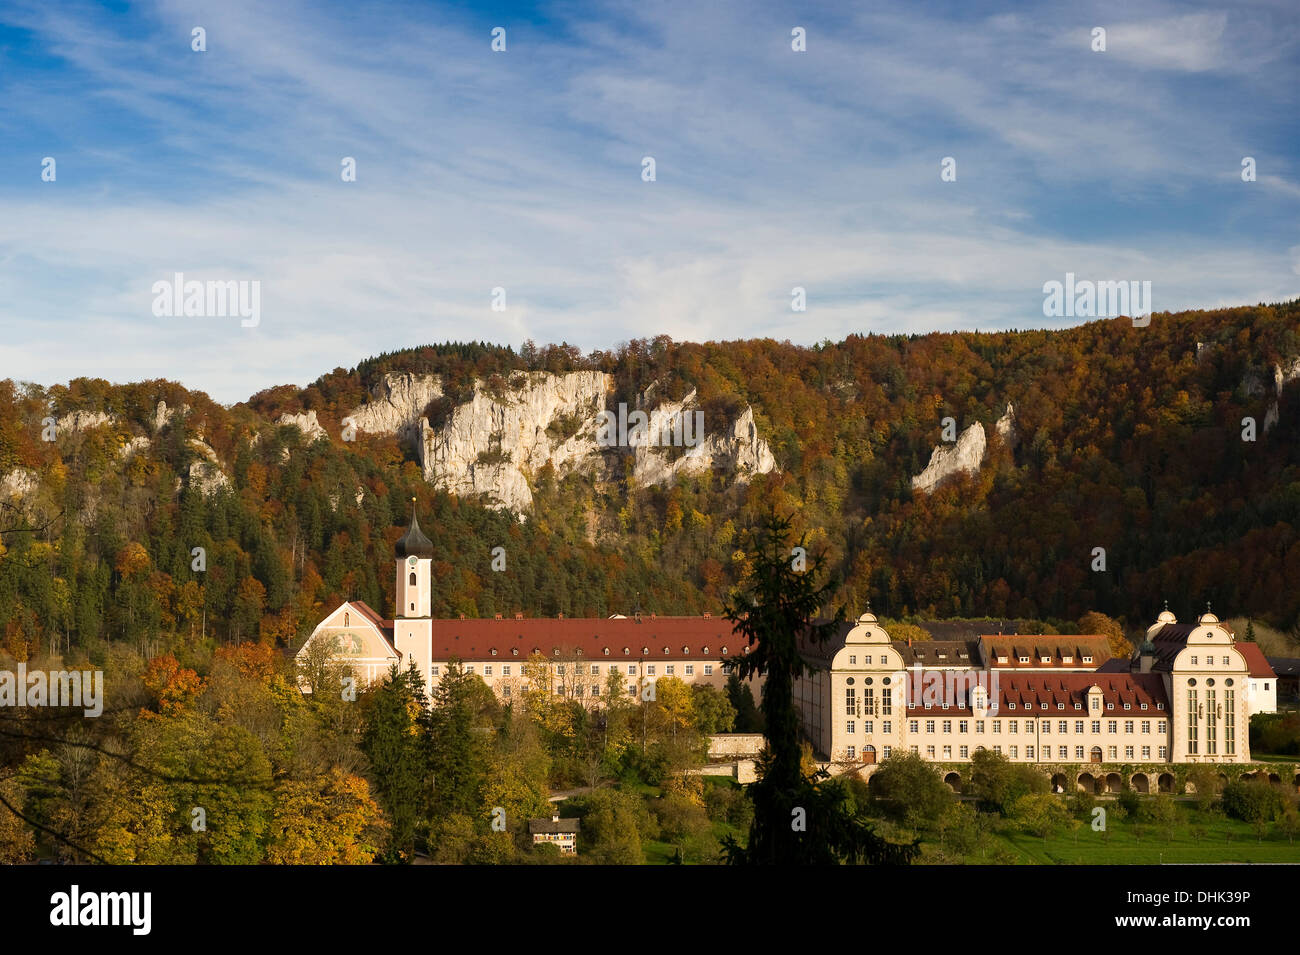 View of Beuron Archabbey, a major house of the Benedictine Order, Upper Danube Valley, Swabian Alp, Baden-Wuerttemberg, Germany, Stock Photo